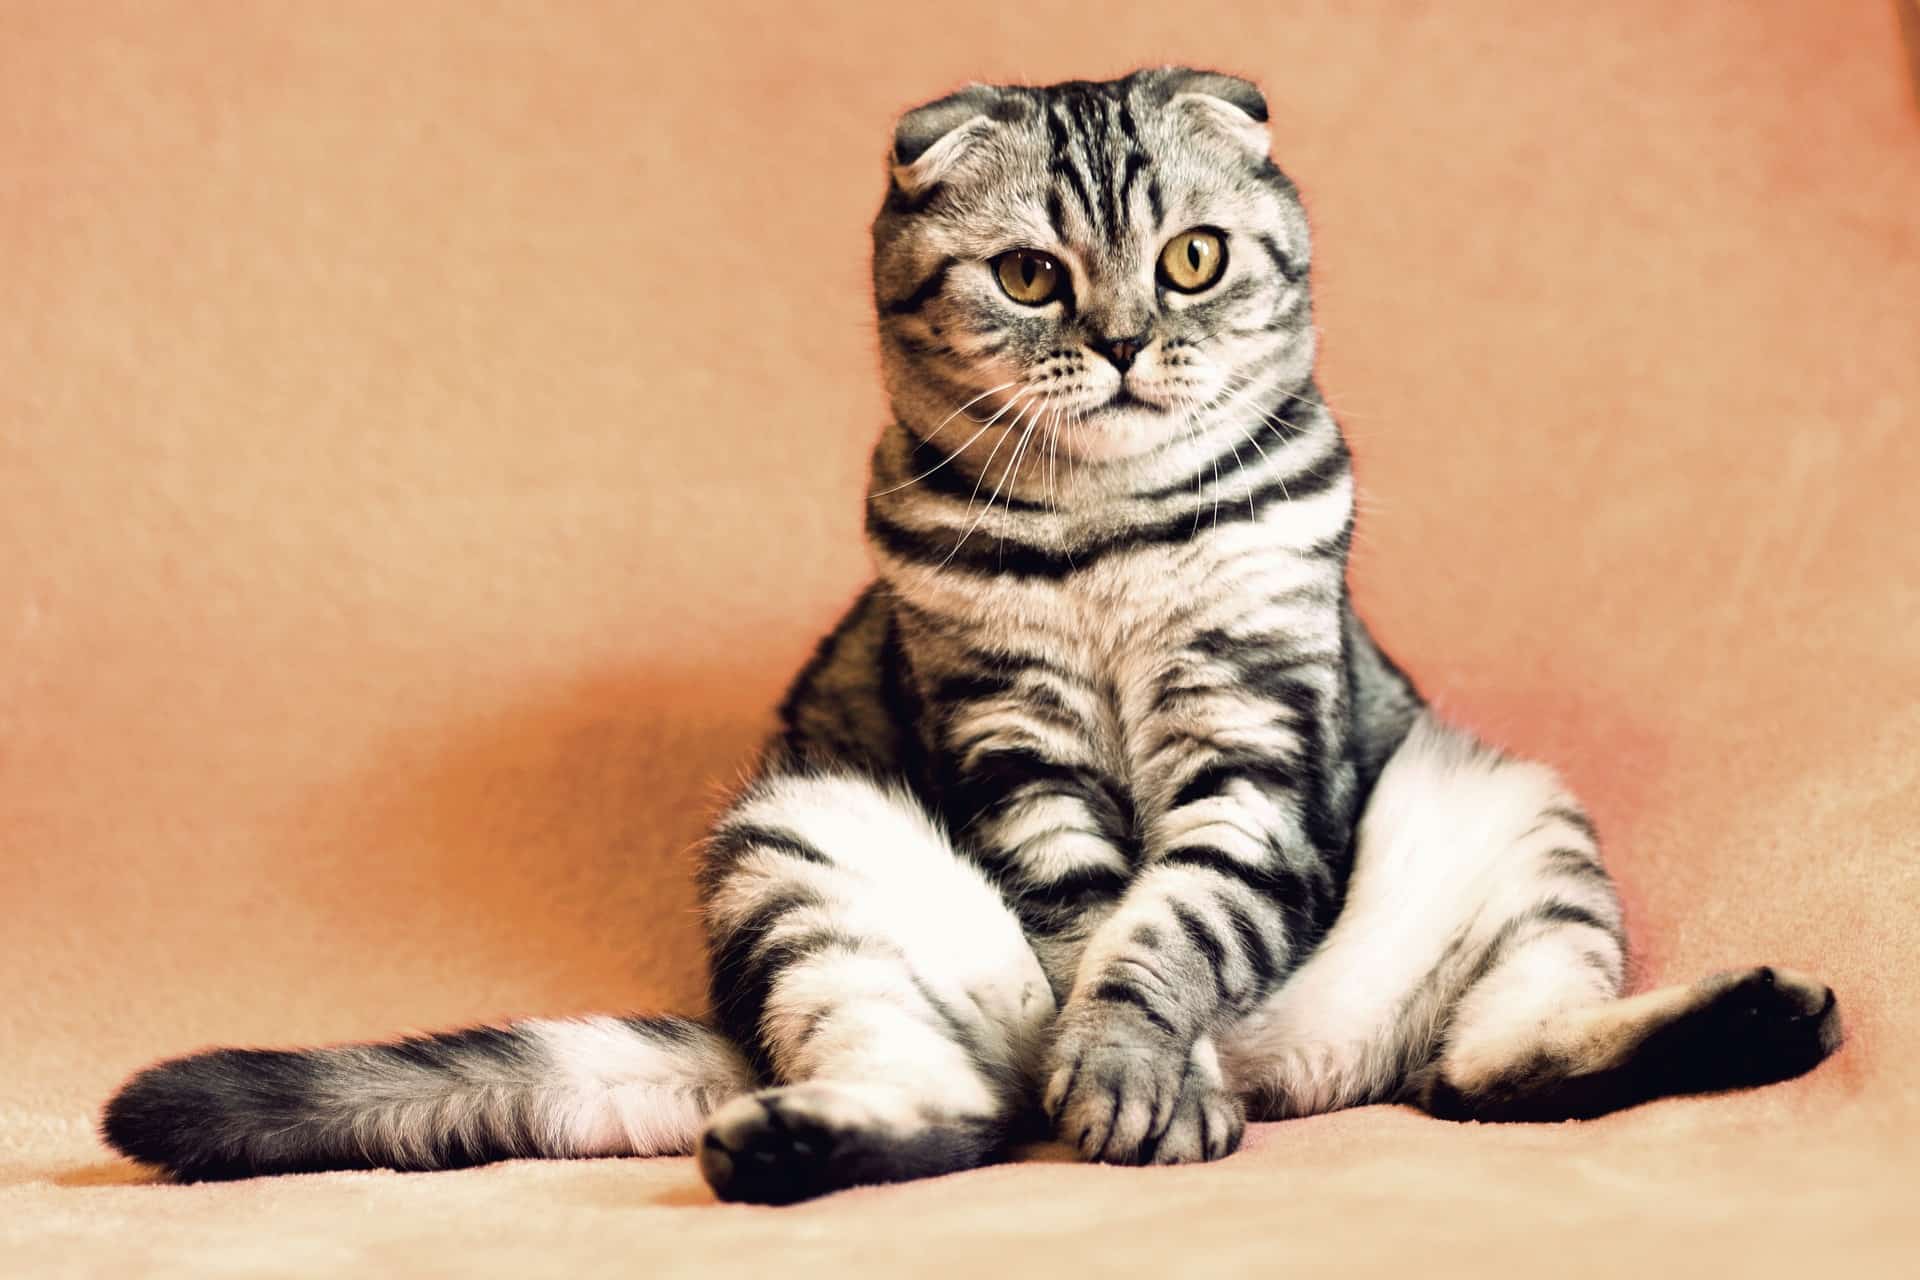 11 Cool Cat Facts For National Pet Day – April 11th